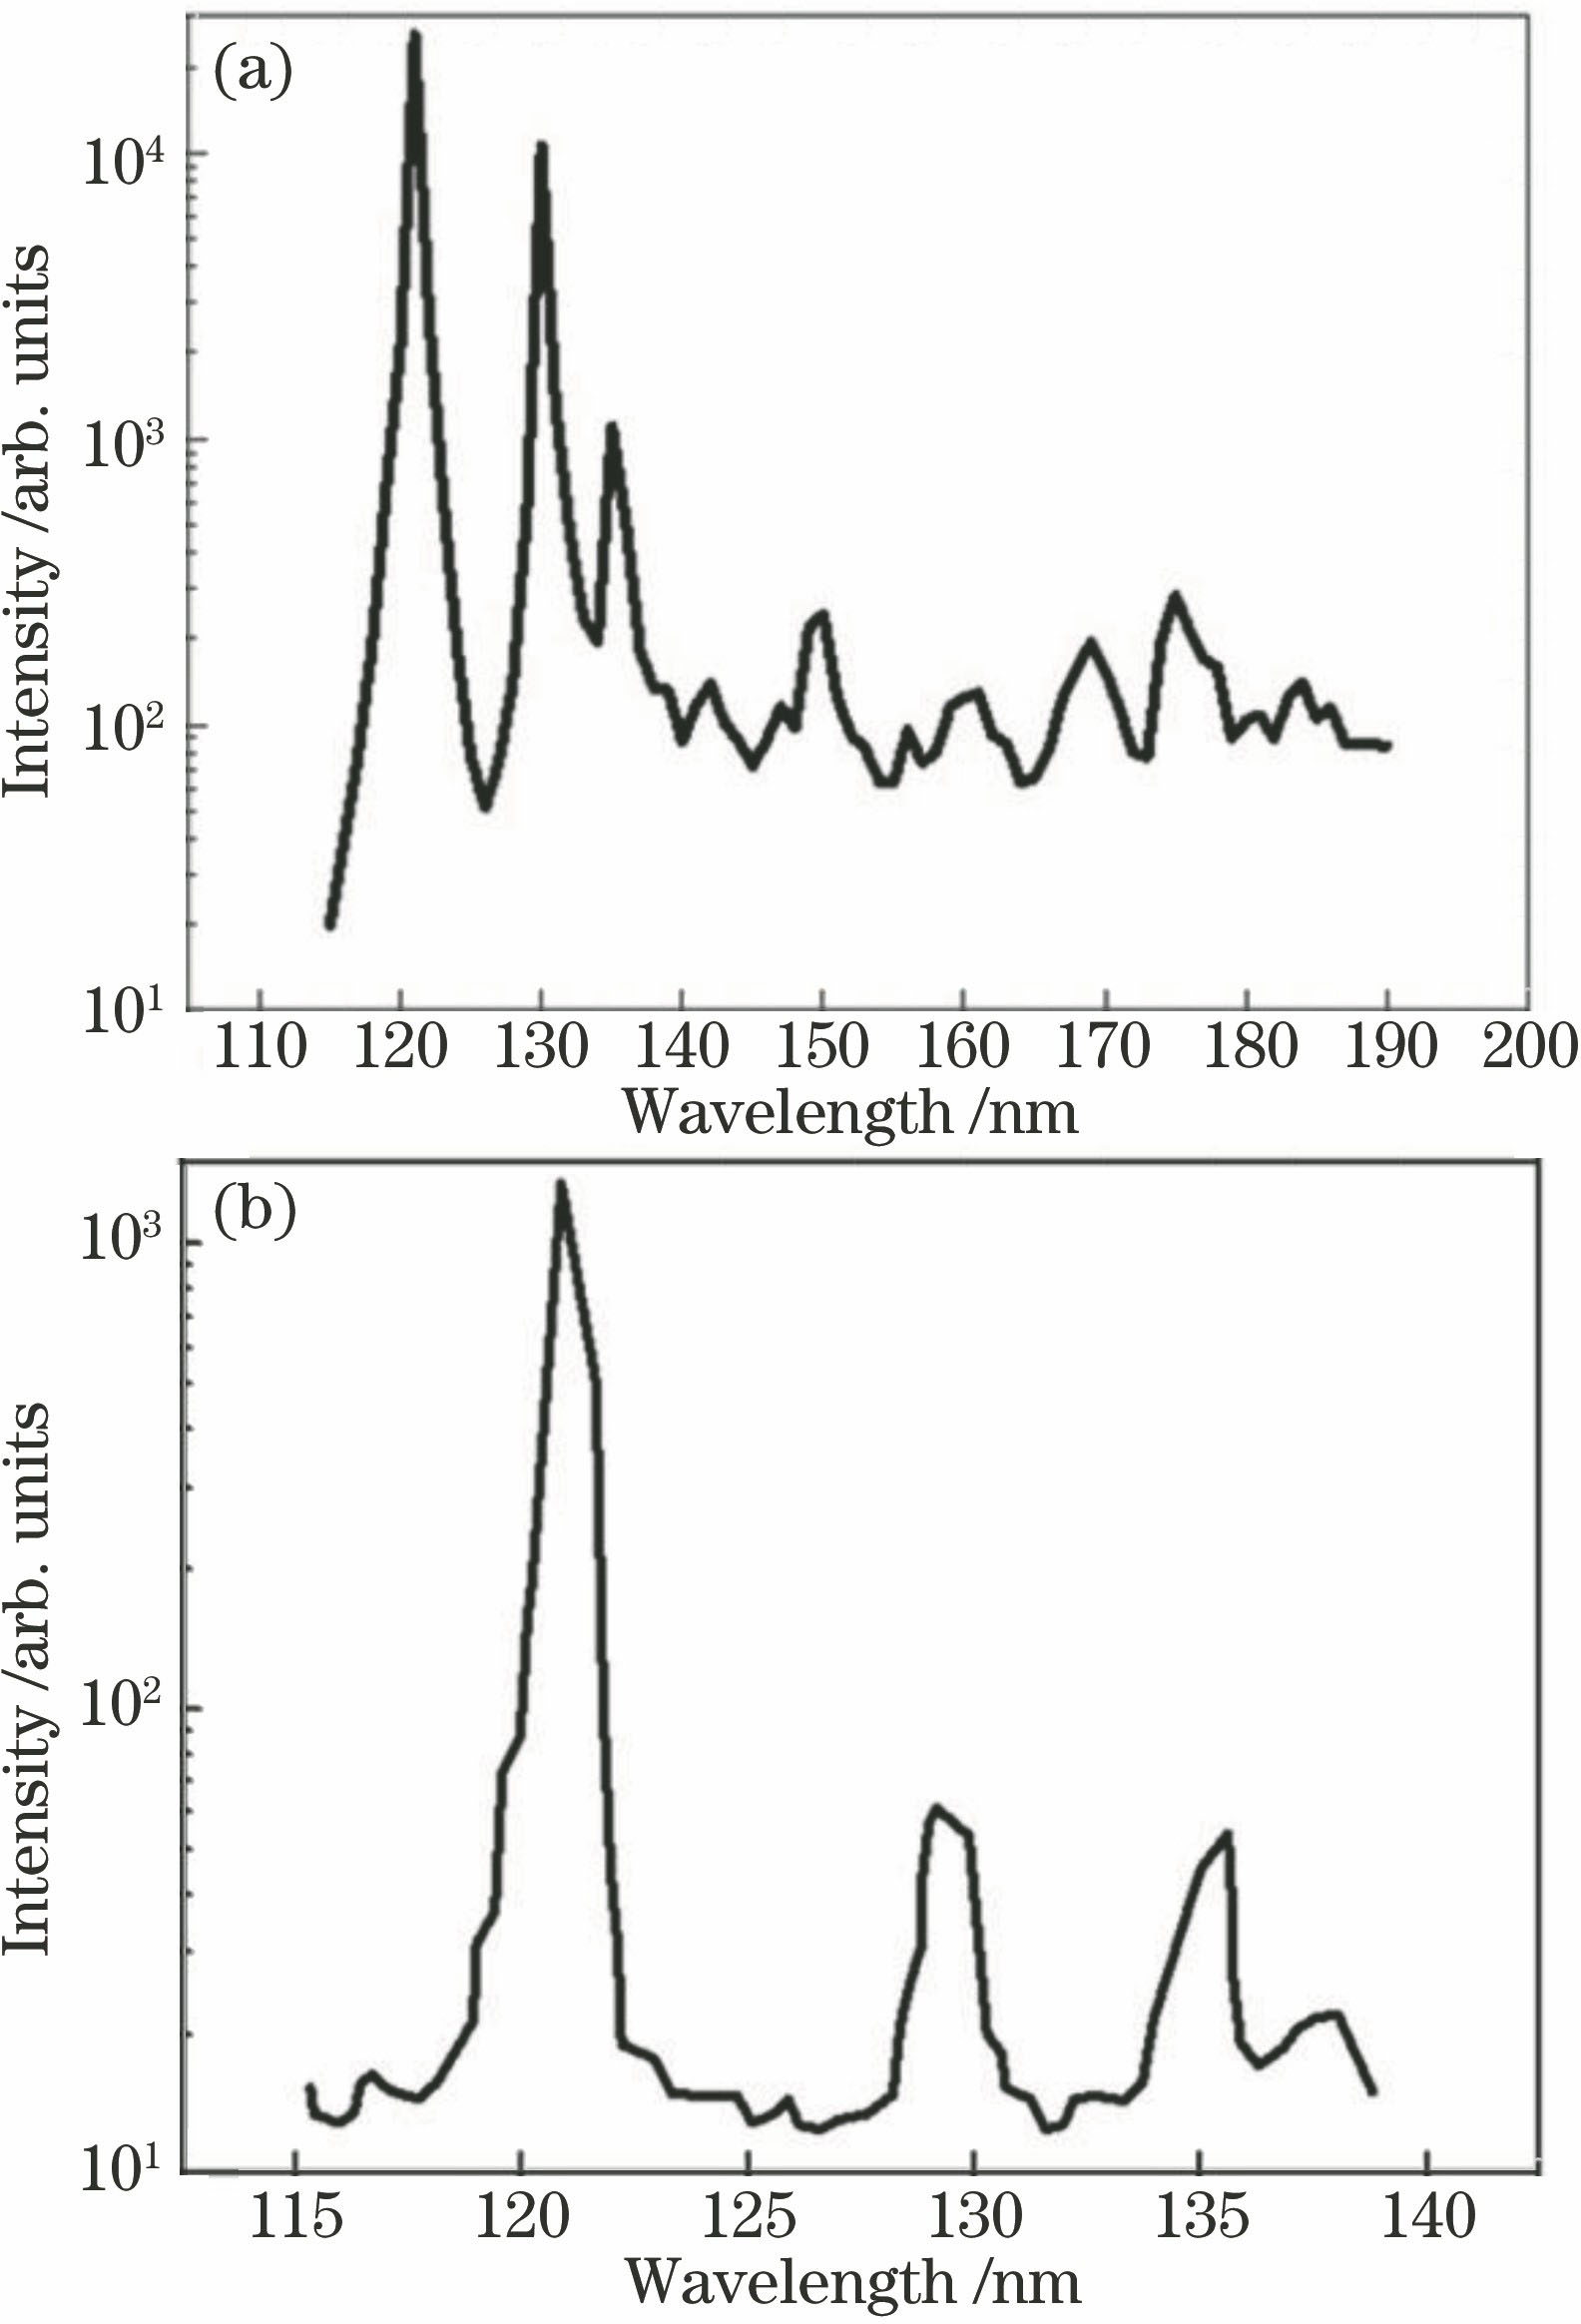 Far ultraviolet radiation intensity of ionosphere. (a) At day; (b) at night